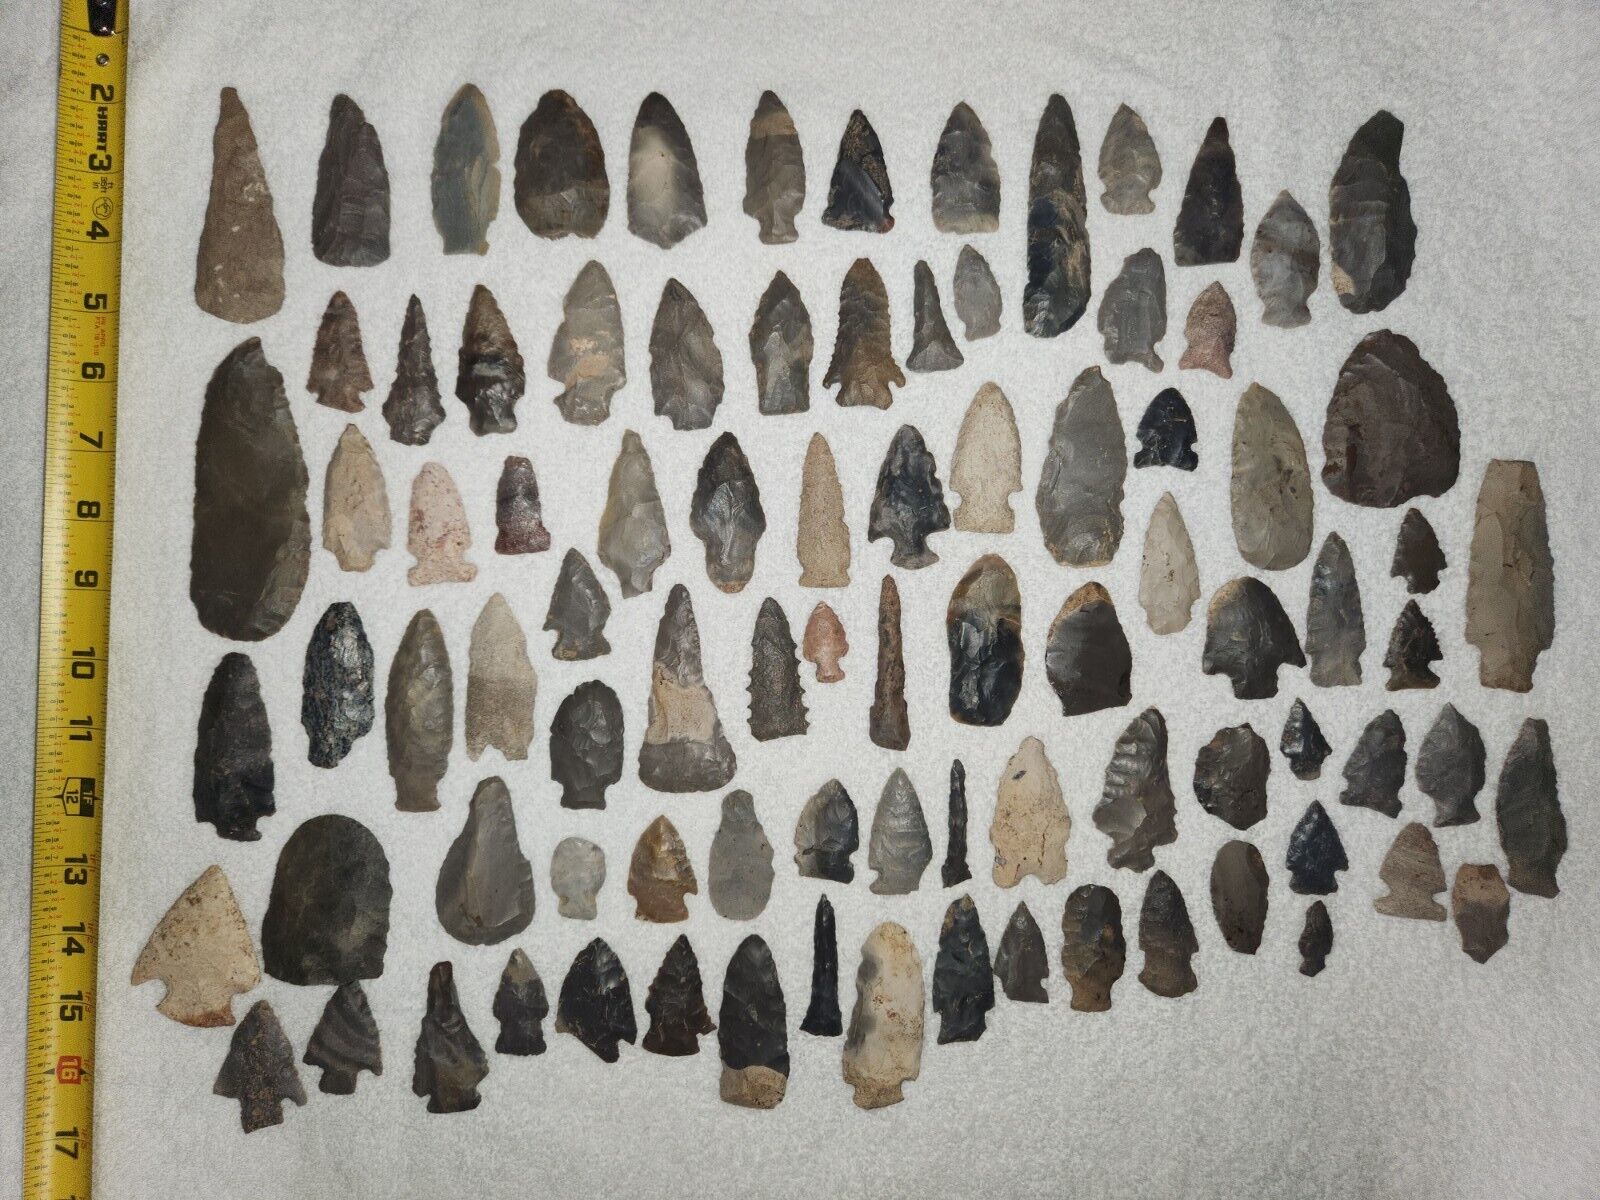 Lot of 89 authentic NATIVE AMERICAN arrowheads